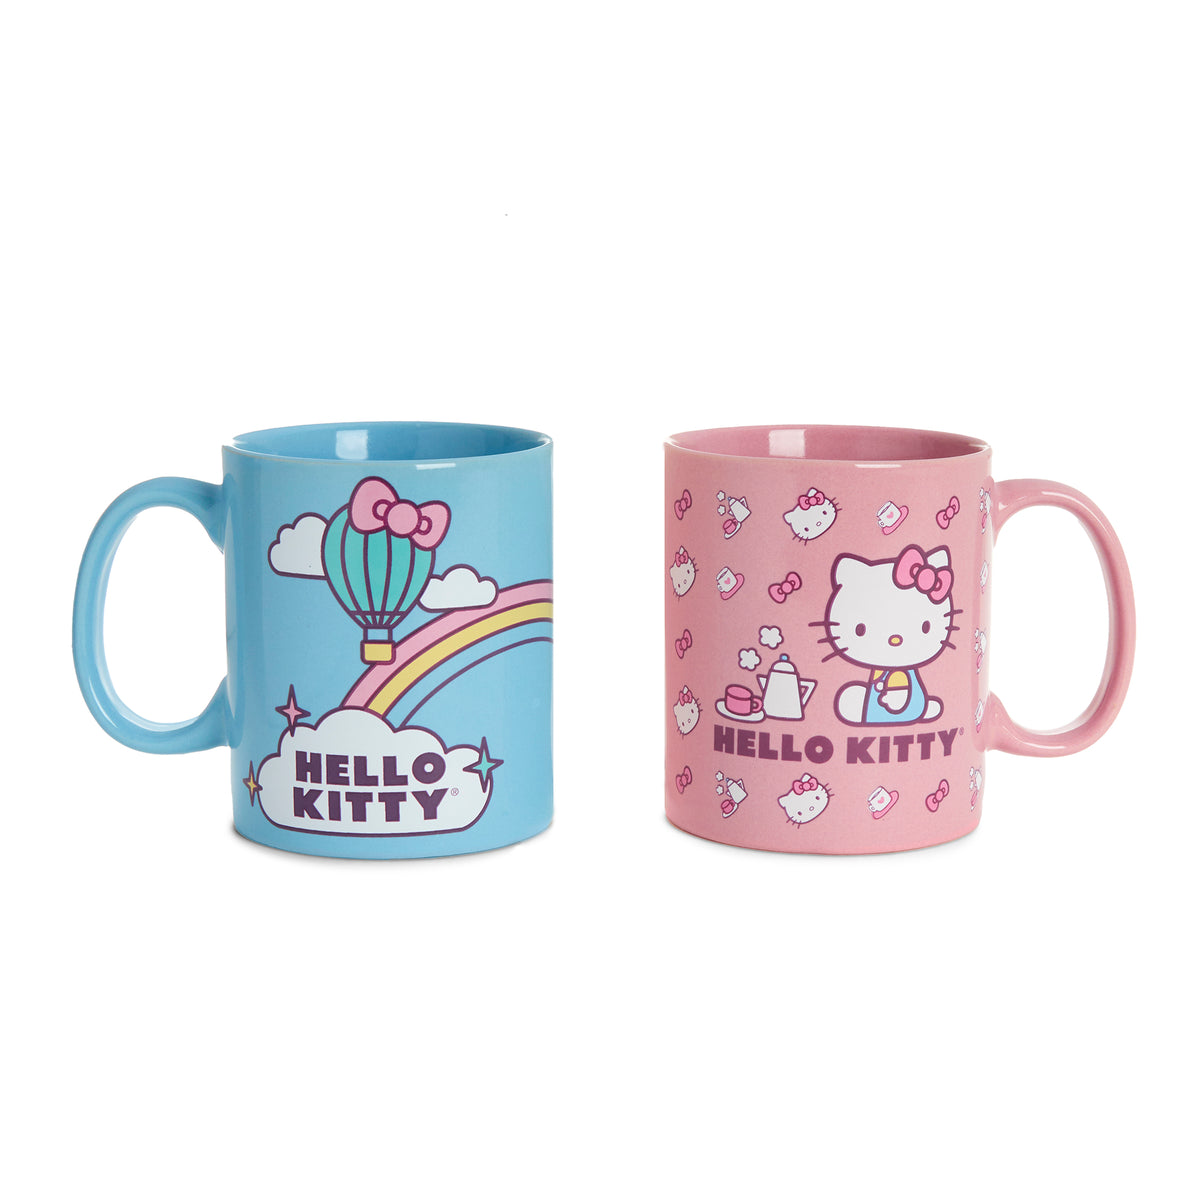 Uncanny Brands Pink Hello Kitty Single Cup Coffee Maker Gift Set with 2-Coffee Mugs